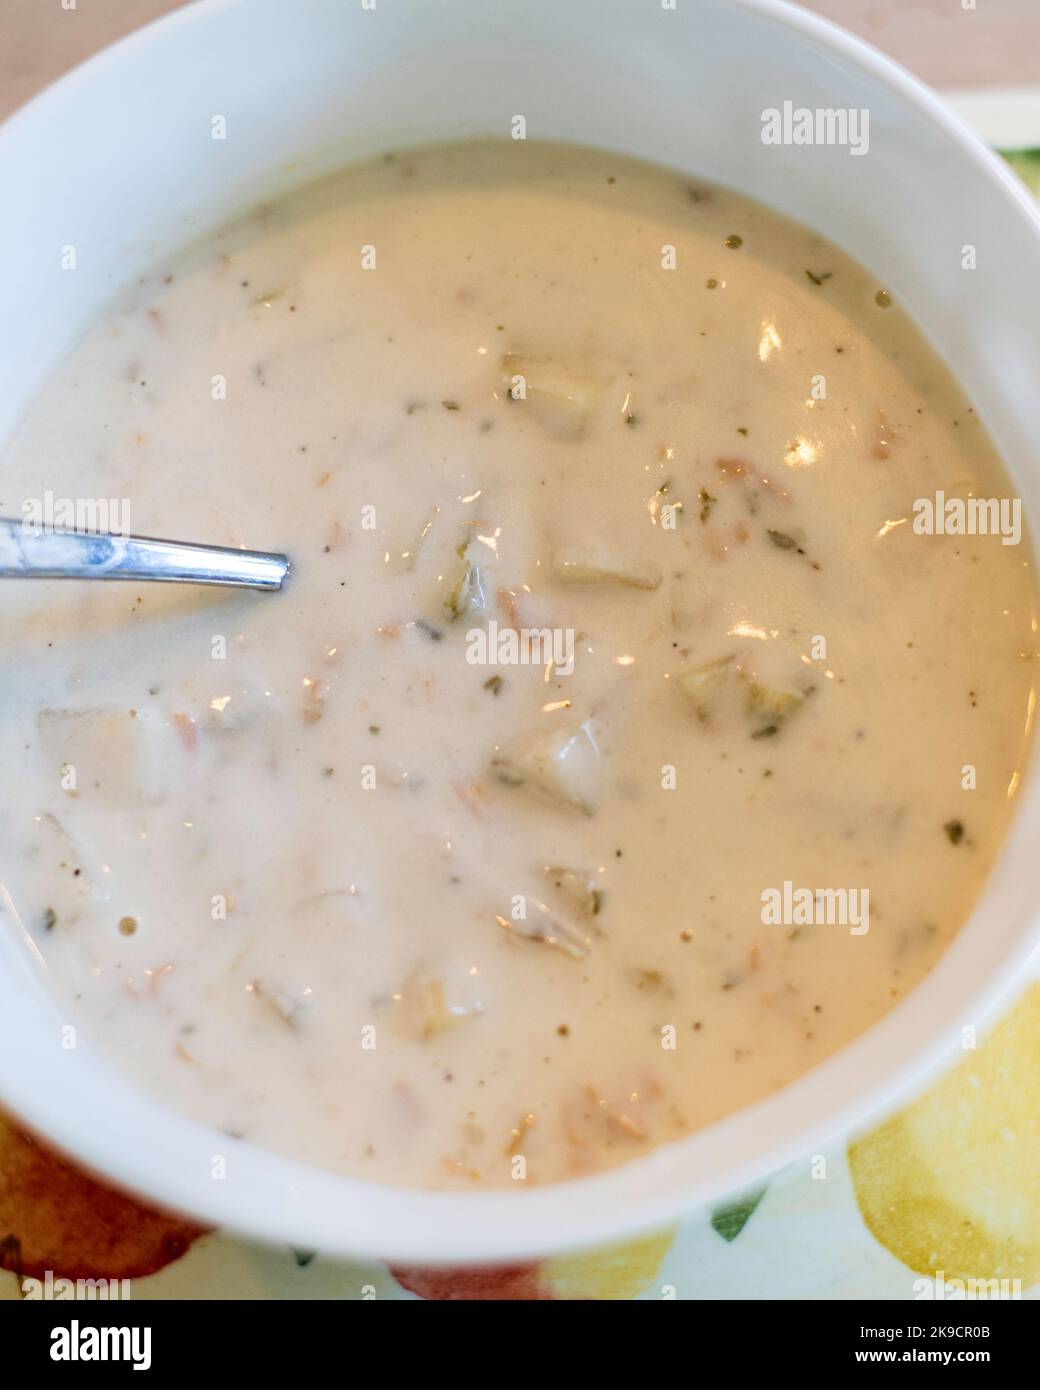 Clam chowder closeup in a white bowl with a spoon. USA Stock Photo